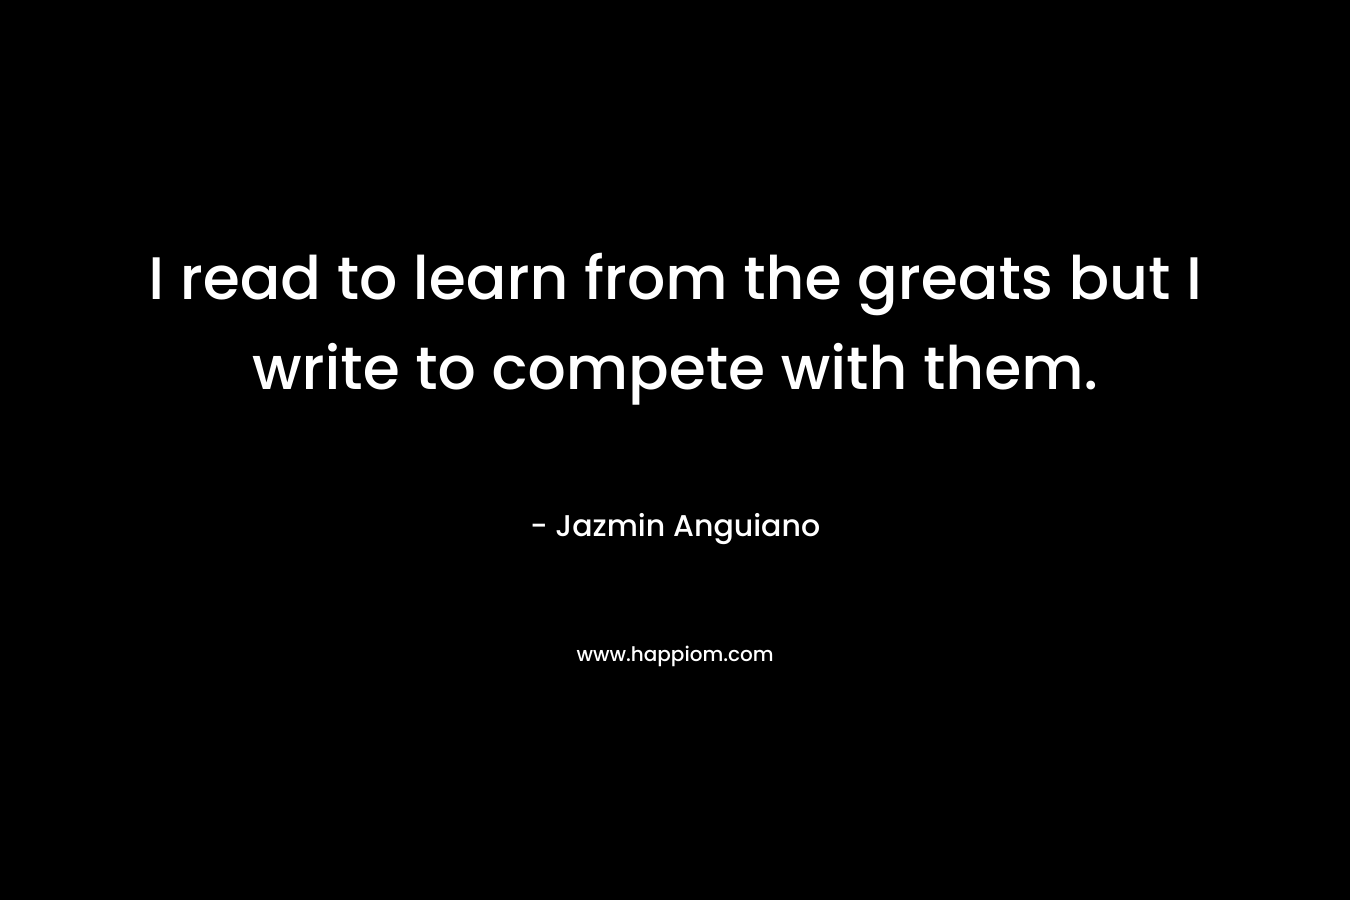 I read to learn from the greats but I write to compete with them. – Jazmin Anguiano